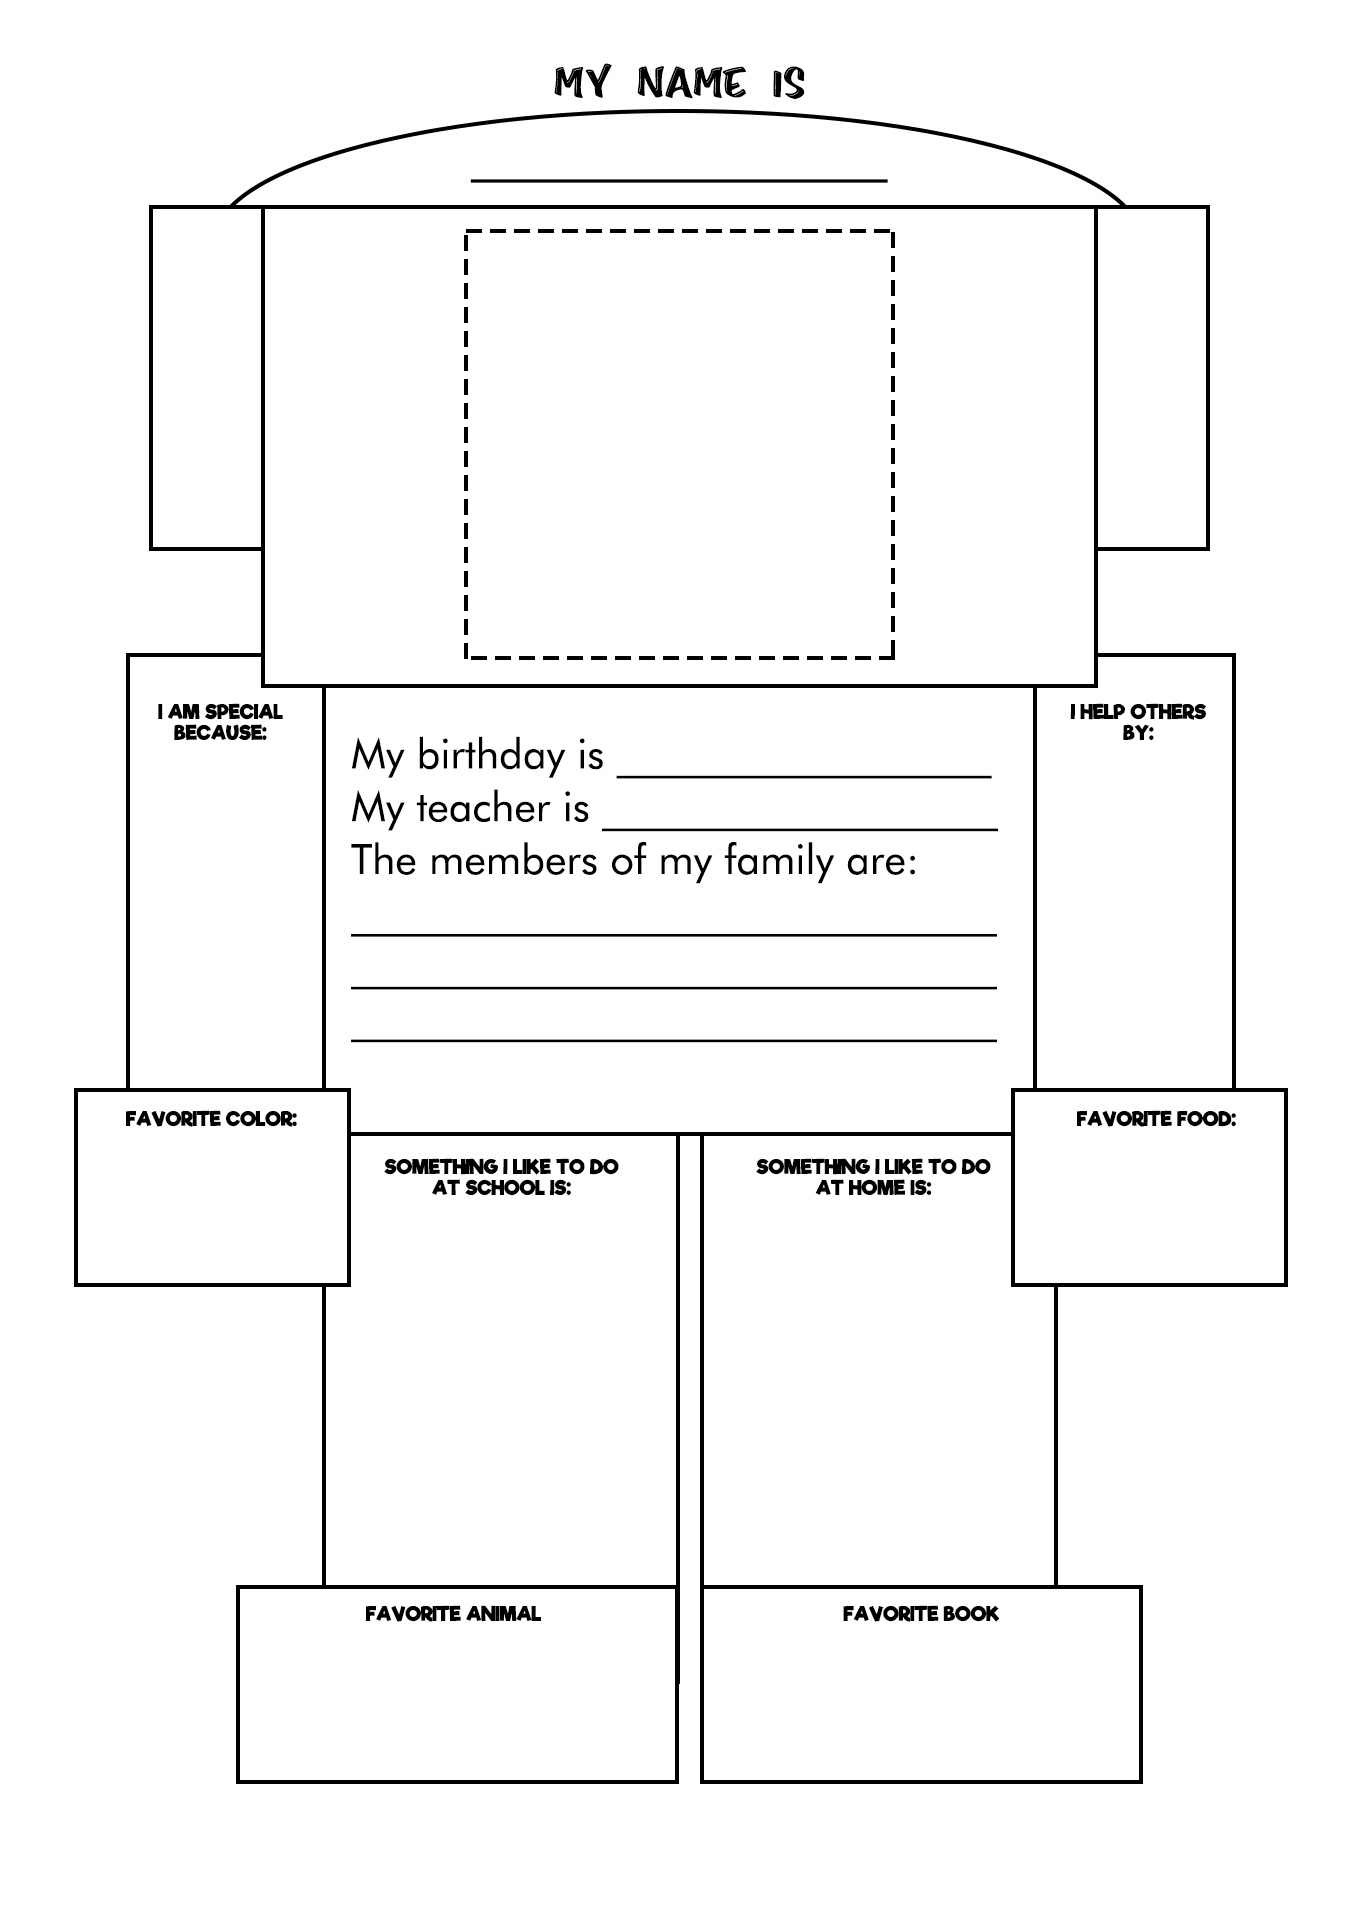 All About Me Robot Worksheet Image